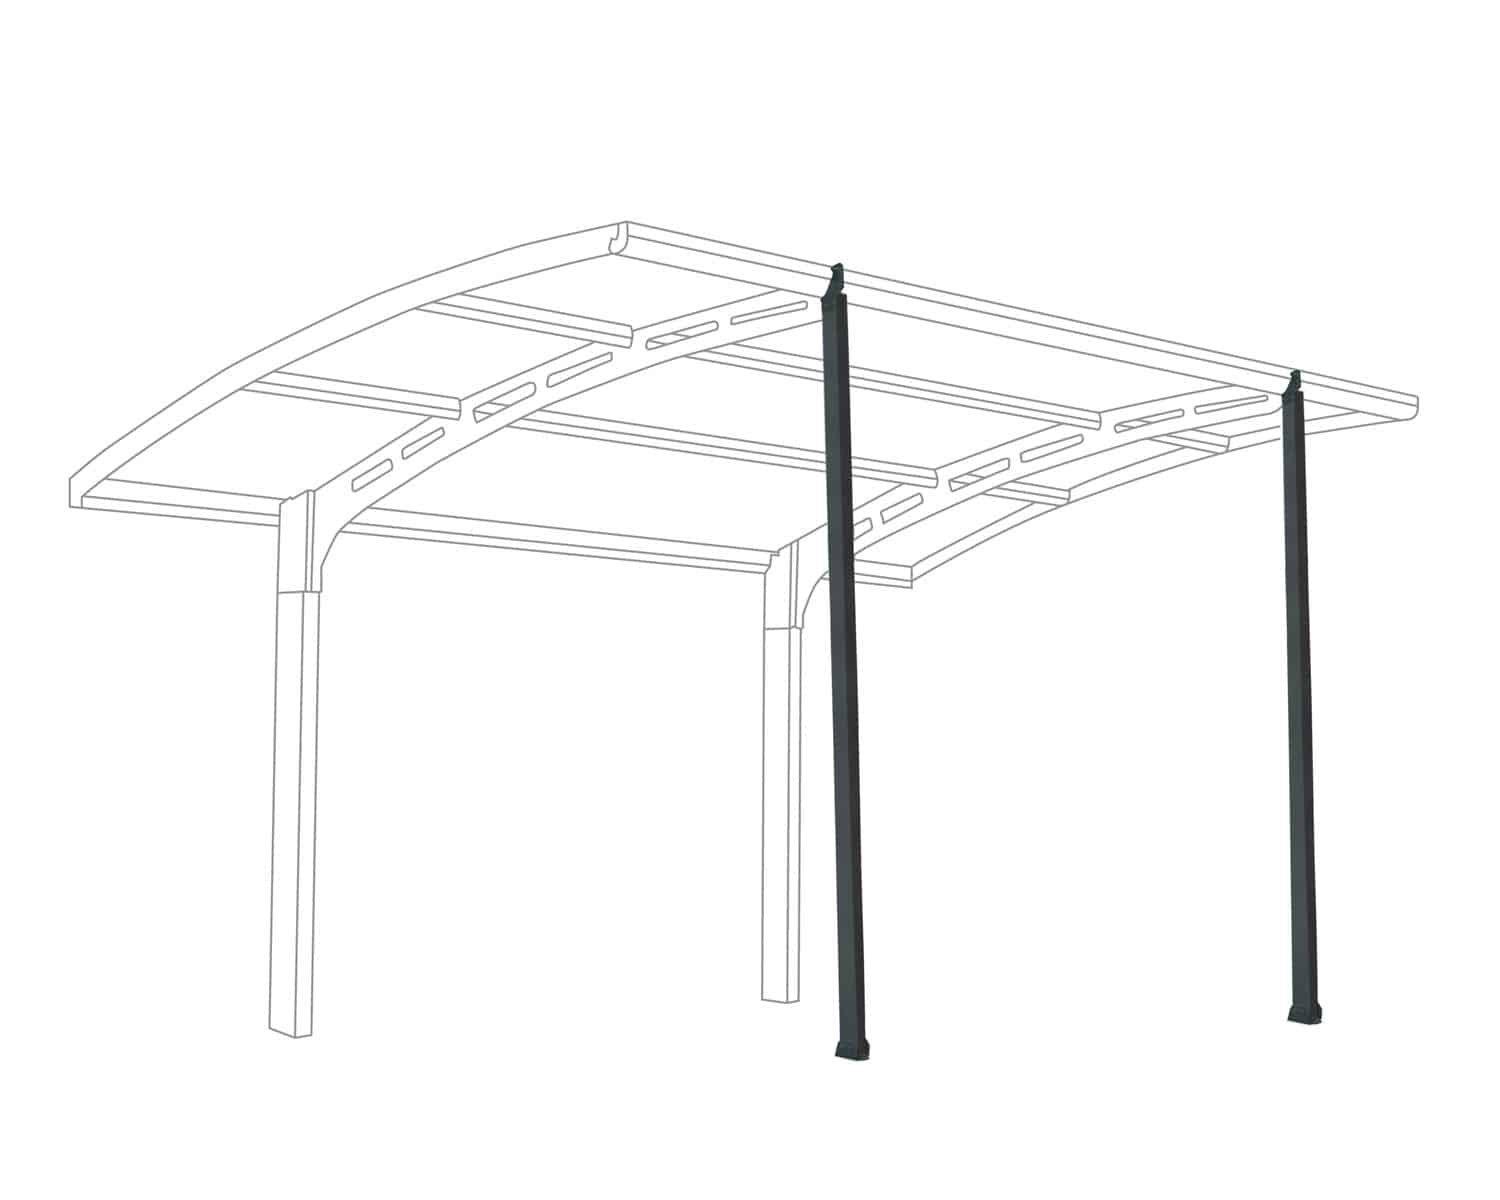 Palram Arizona Carport Roof Support Kit - Gray (HG9107) Increase your Arizona Carport’s resistance to severe weather conditions with these detachable support posts.